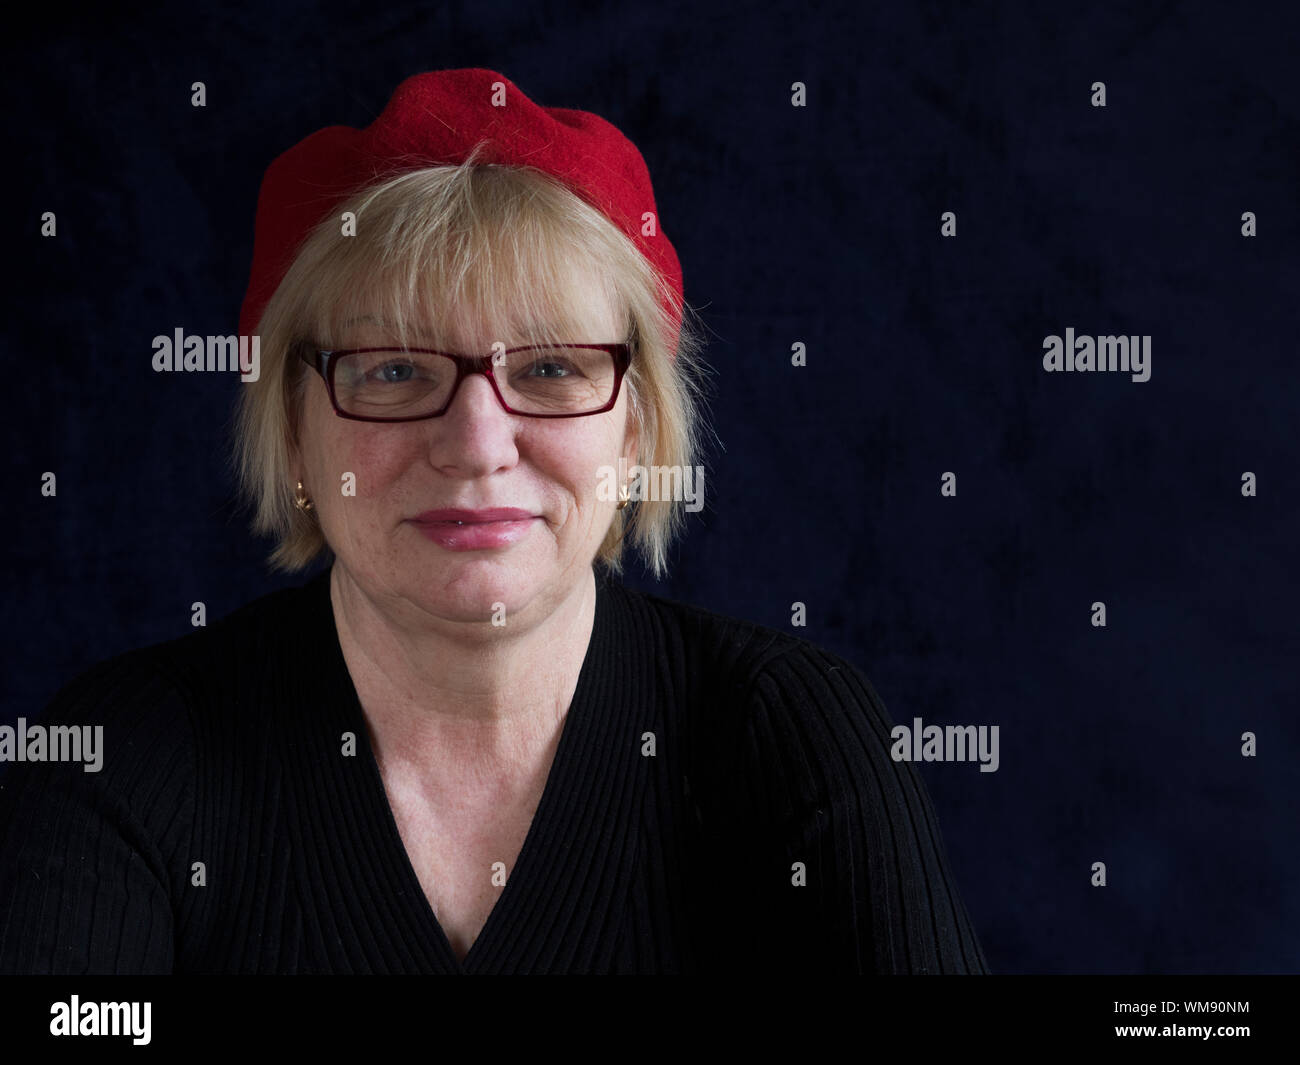 Portrait Of Smiling Mature Woman With Red Cap Against Black Background Stock Photo